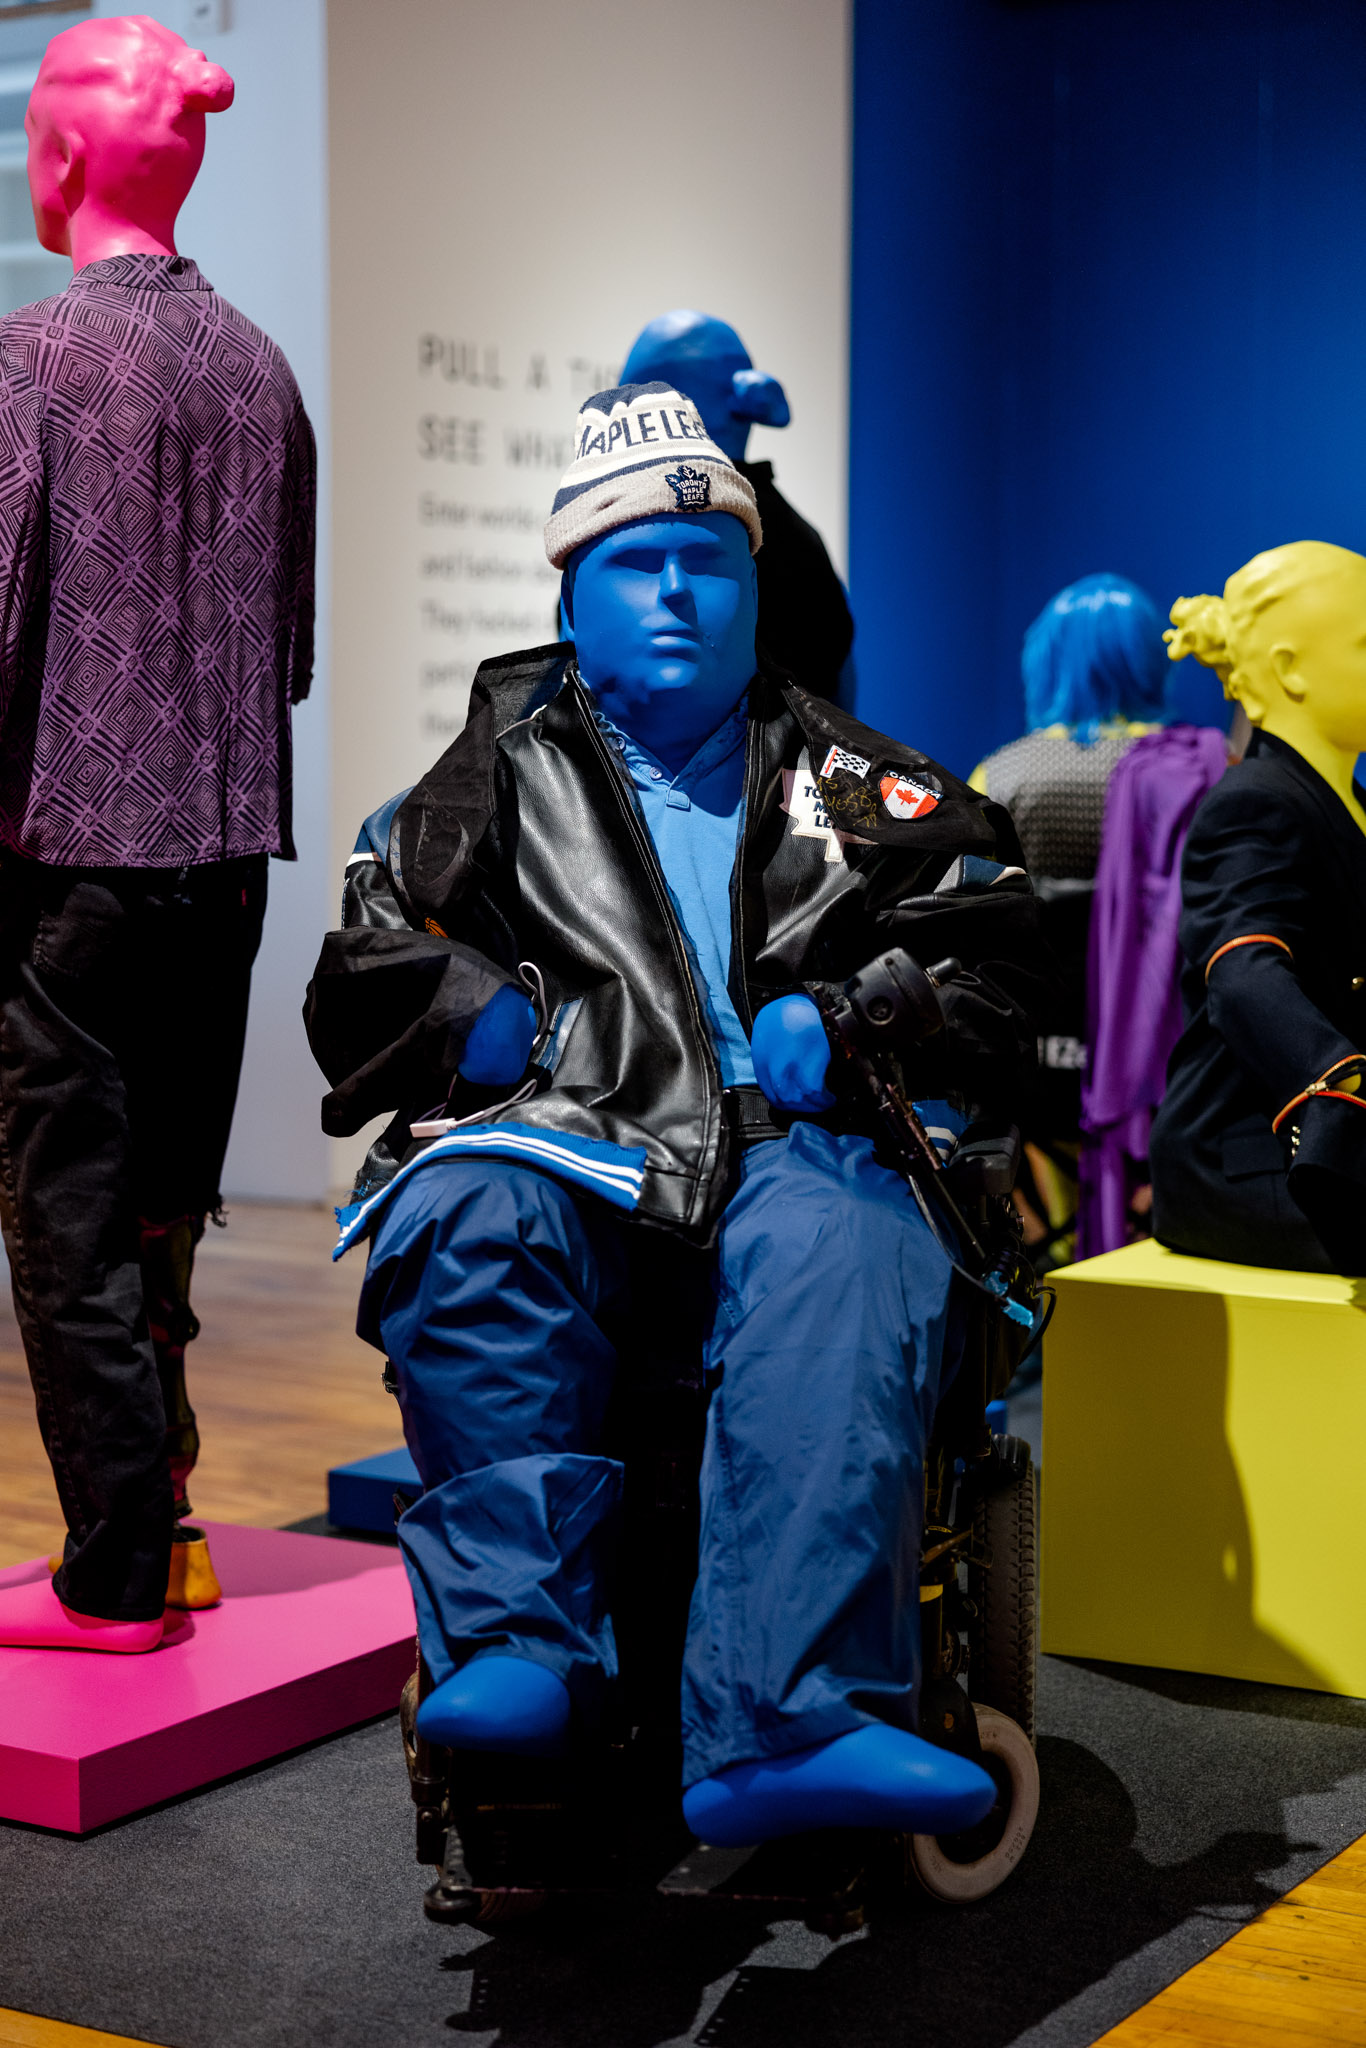 A Blue mannequin in a wheelchair is wearing a varsity jacket and toque in a gallery setting.